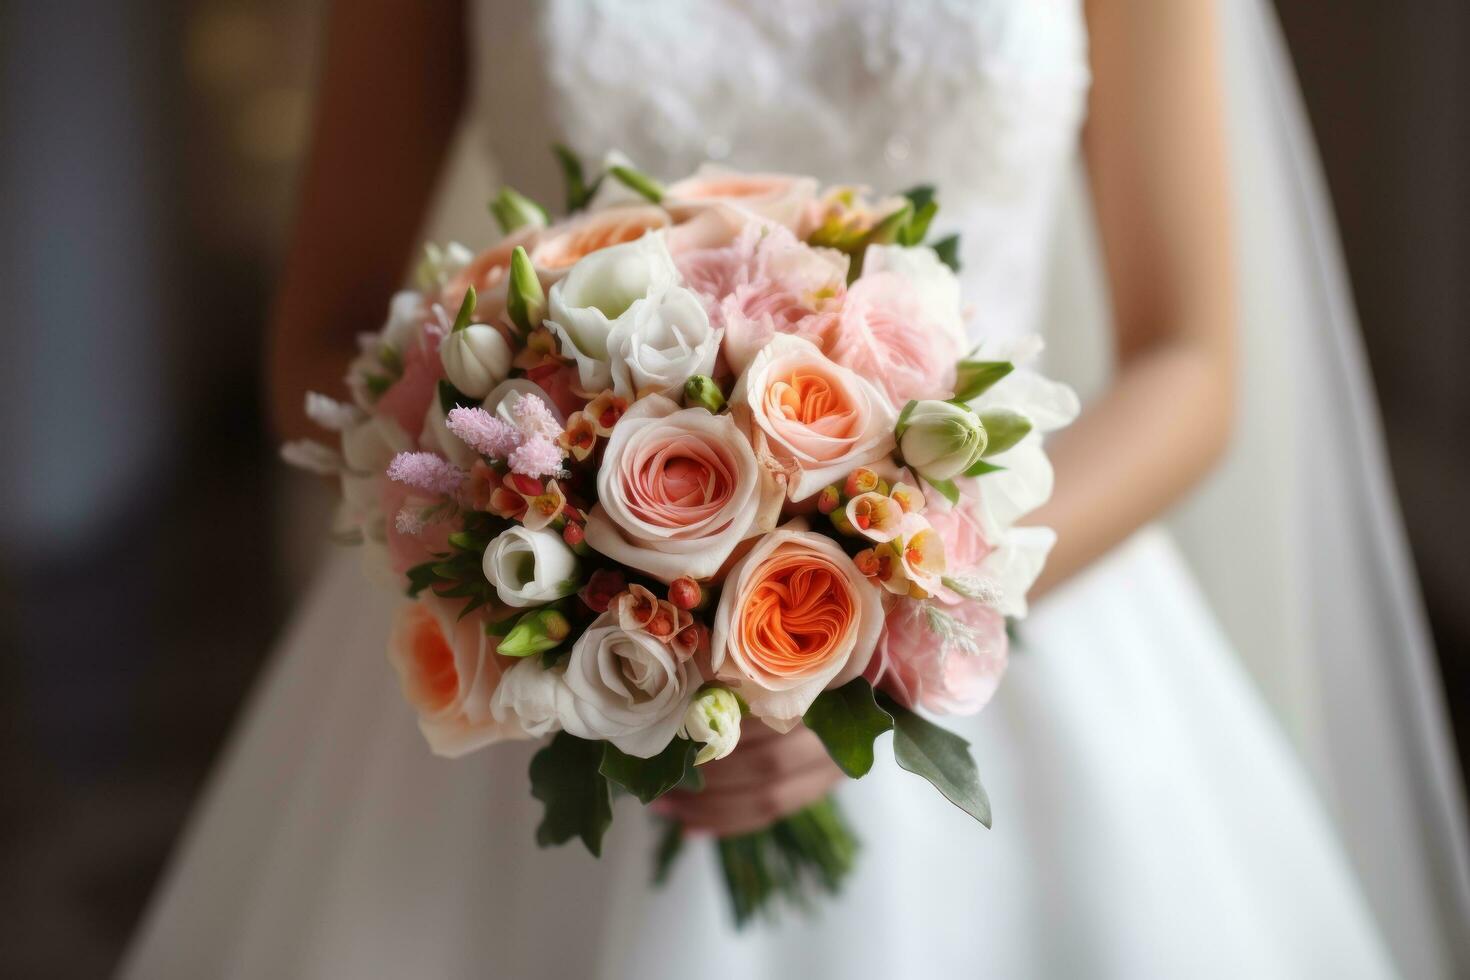 A beautiful bride holding her pink and white wedding bouquet photo